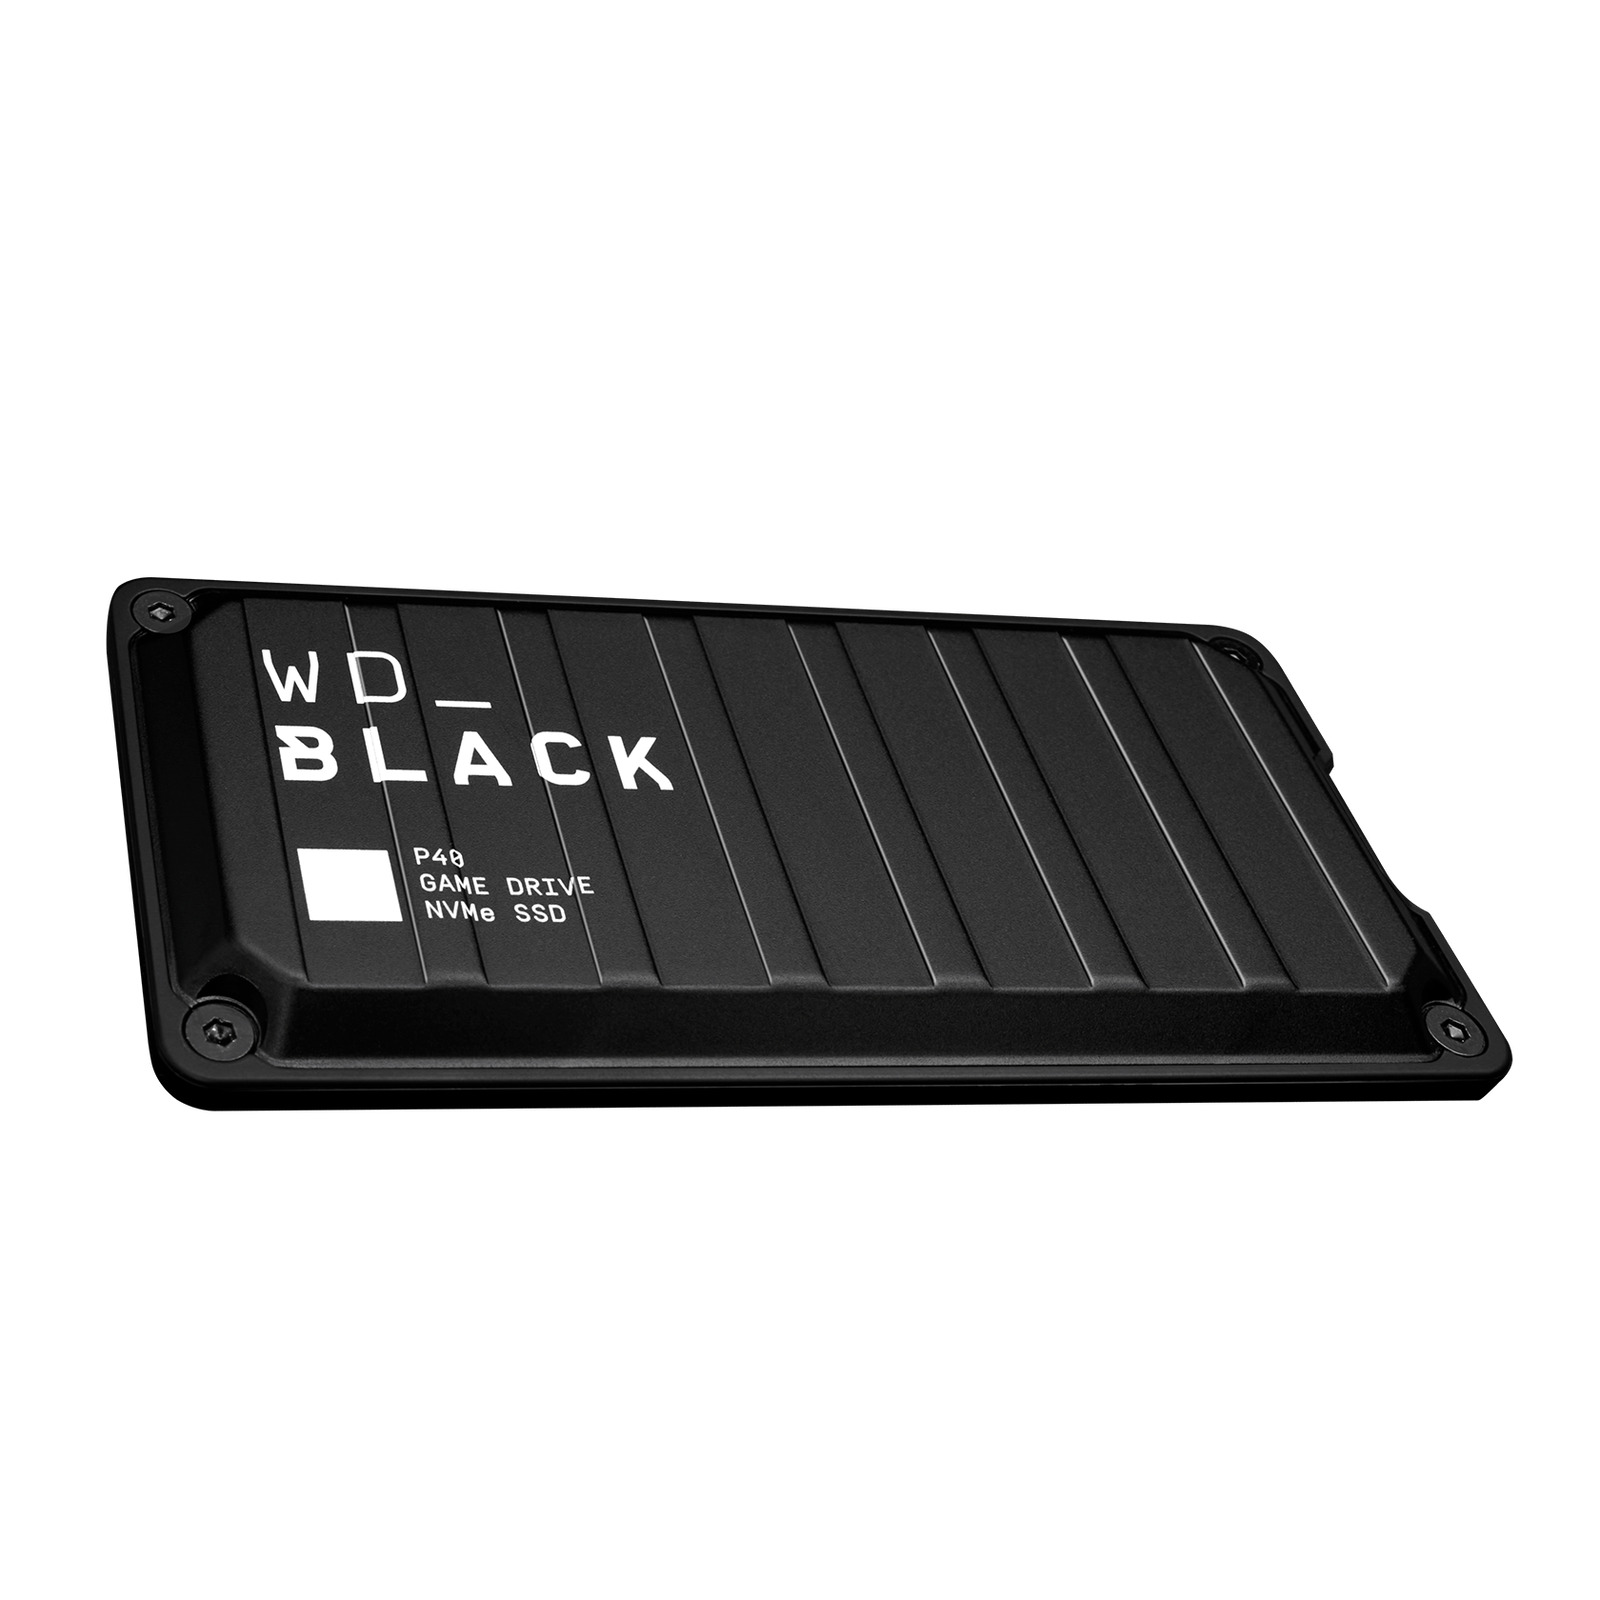 WD_BLACK 1TB P40 Game Drive SSD, External Solid State Drive - WDBAWY0010BBK-WESN